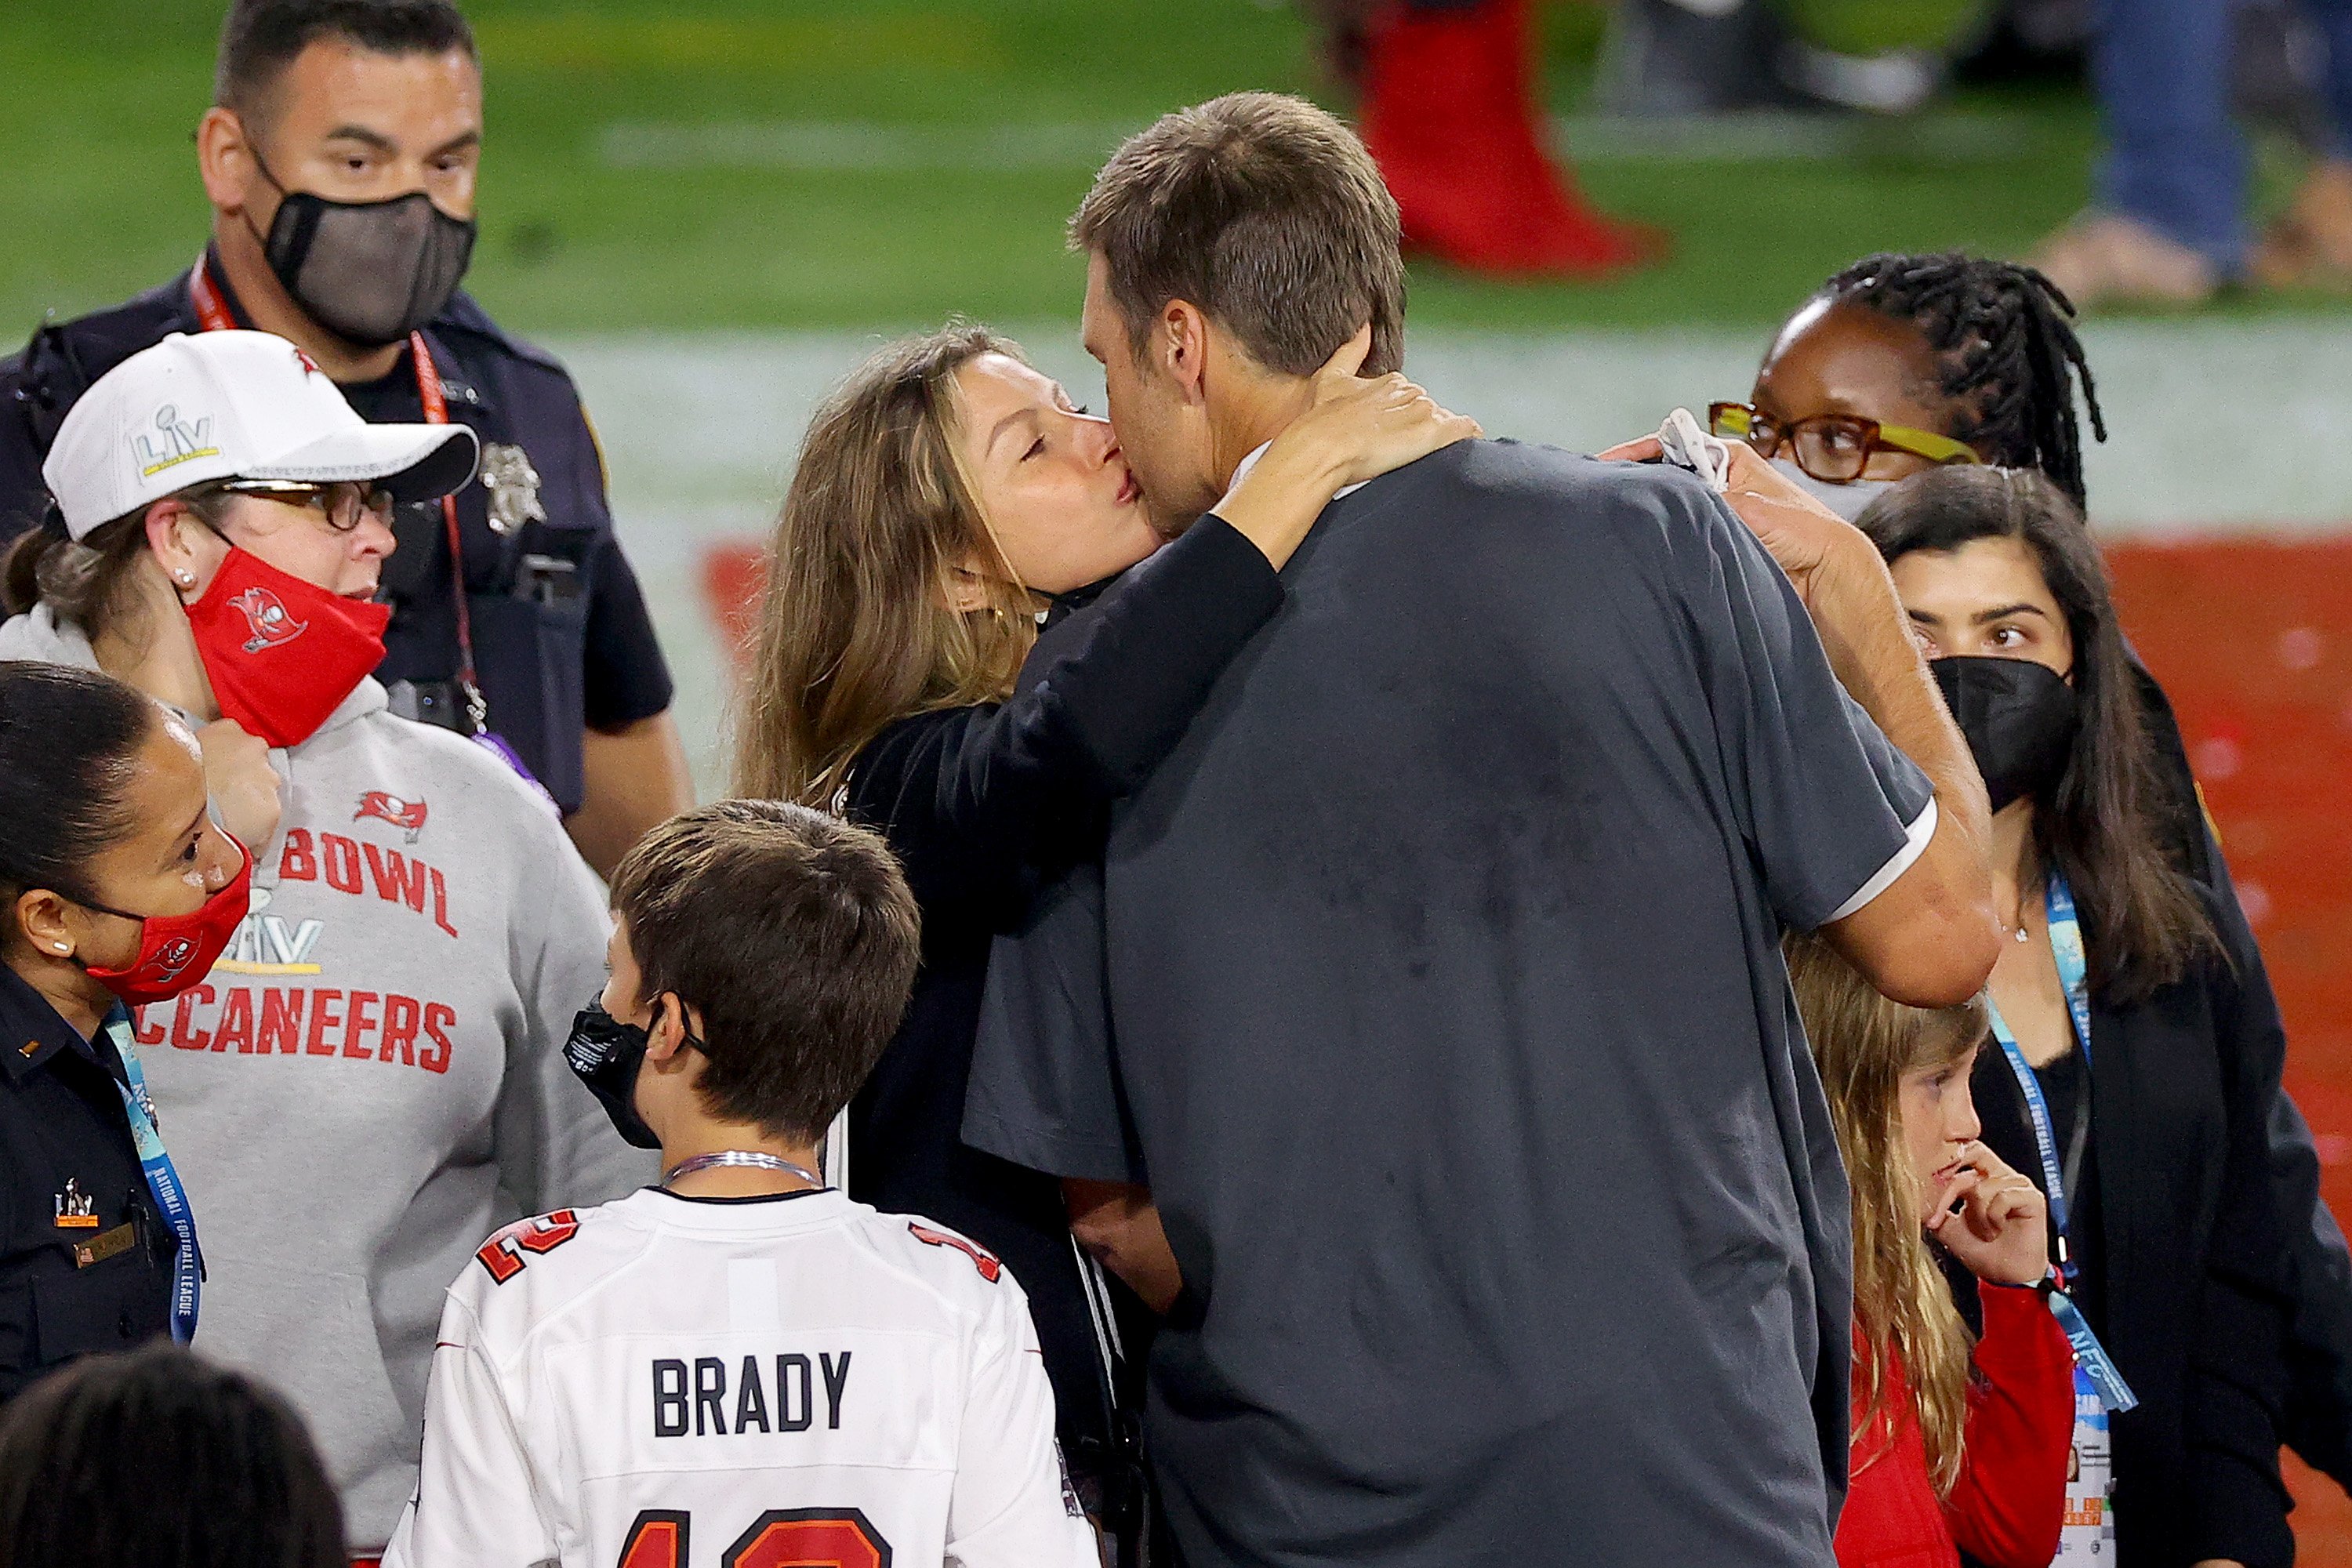 Tom Brady #12 of the Tampa Bay Buccaneers celebrates with Gisele Bundchen after winning Super Bowl LV at Raymond James Stadium on February 7, 2021 in Tampa, Florida. | Source: Getty Images